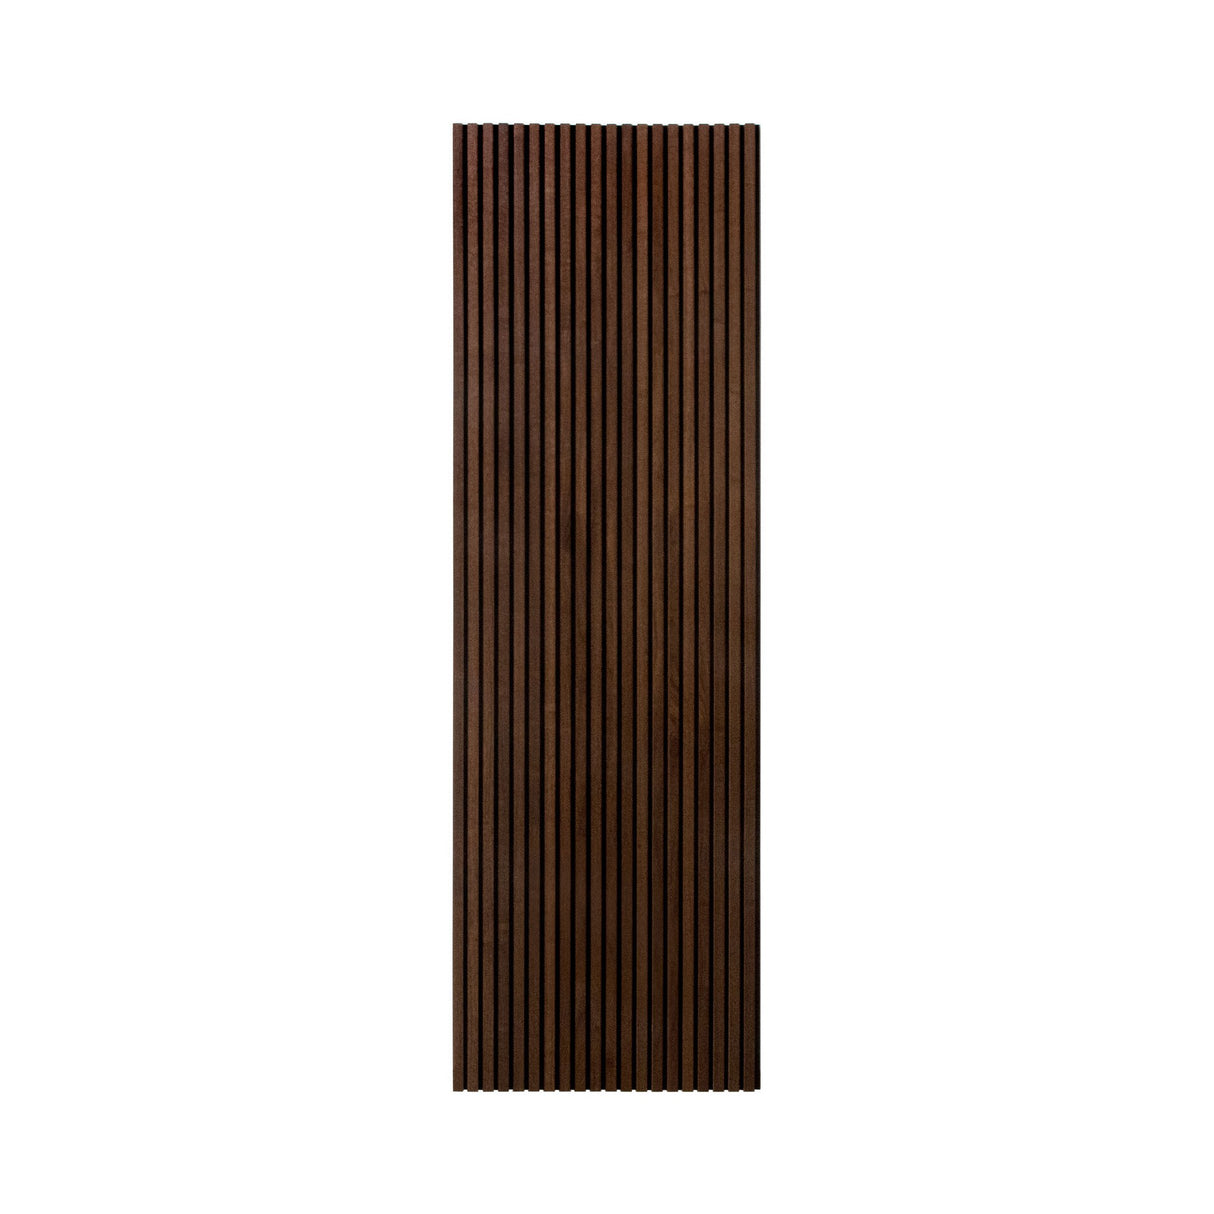 Primacoustic ECOScapes Slat Wall Panel, 32 x 96-Inch, Oak 2-Pack